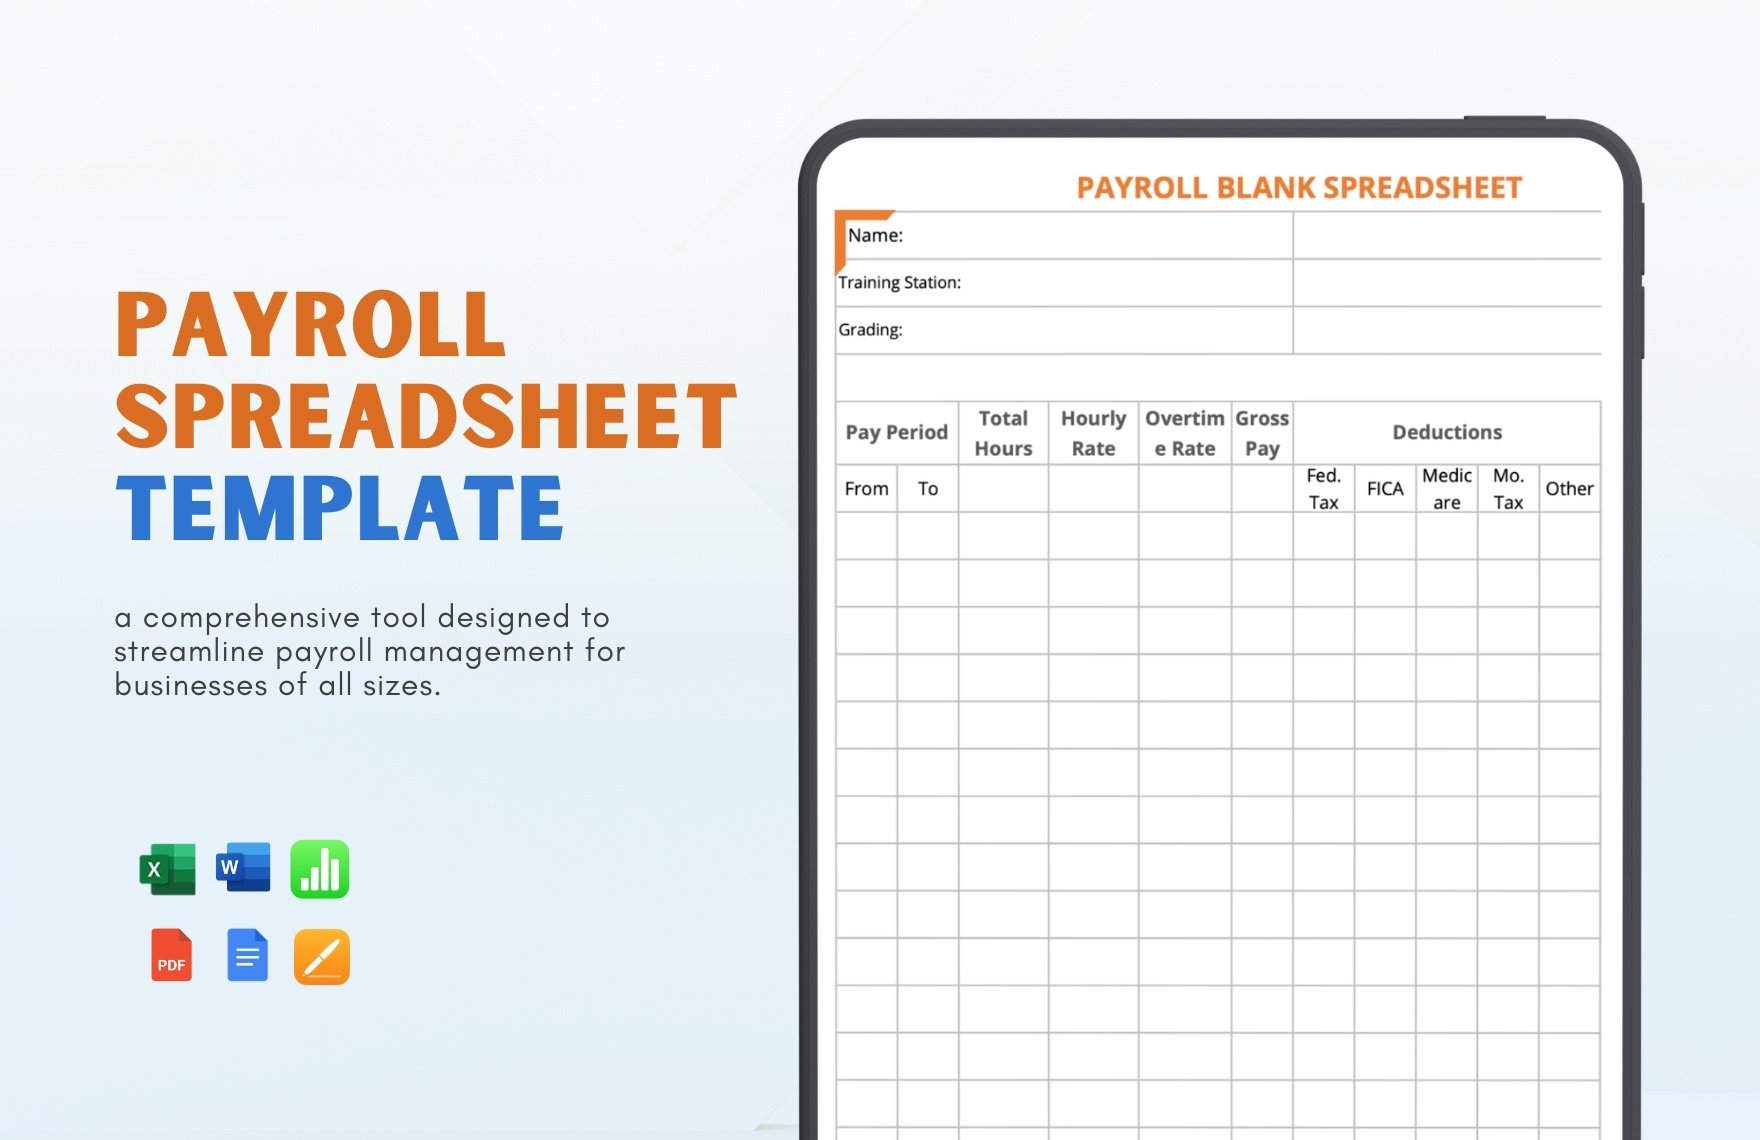 Payroll Spreadsheet Template in Word, Google Docs, Excel, PDF, Apple Pages, Apple Numbers